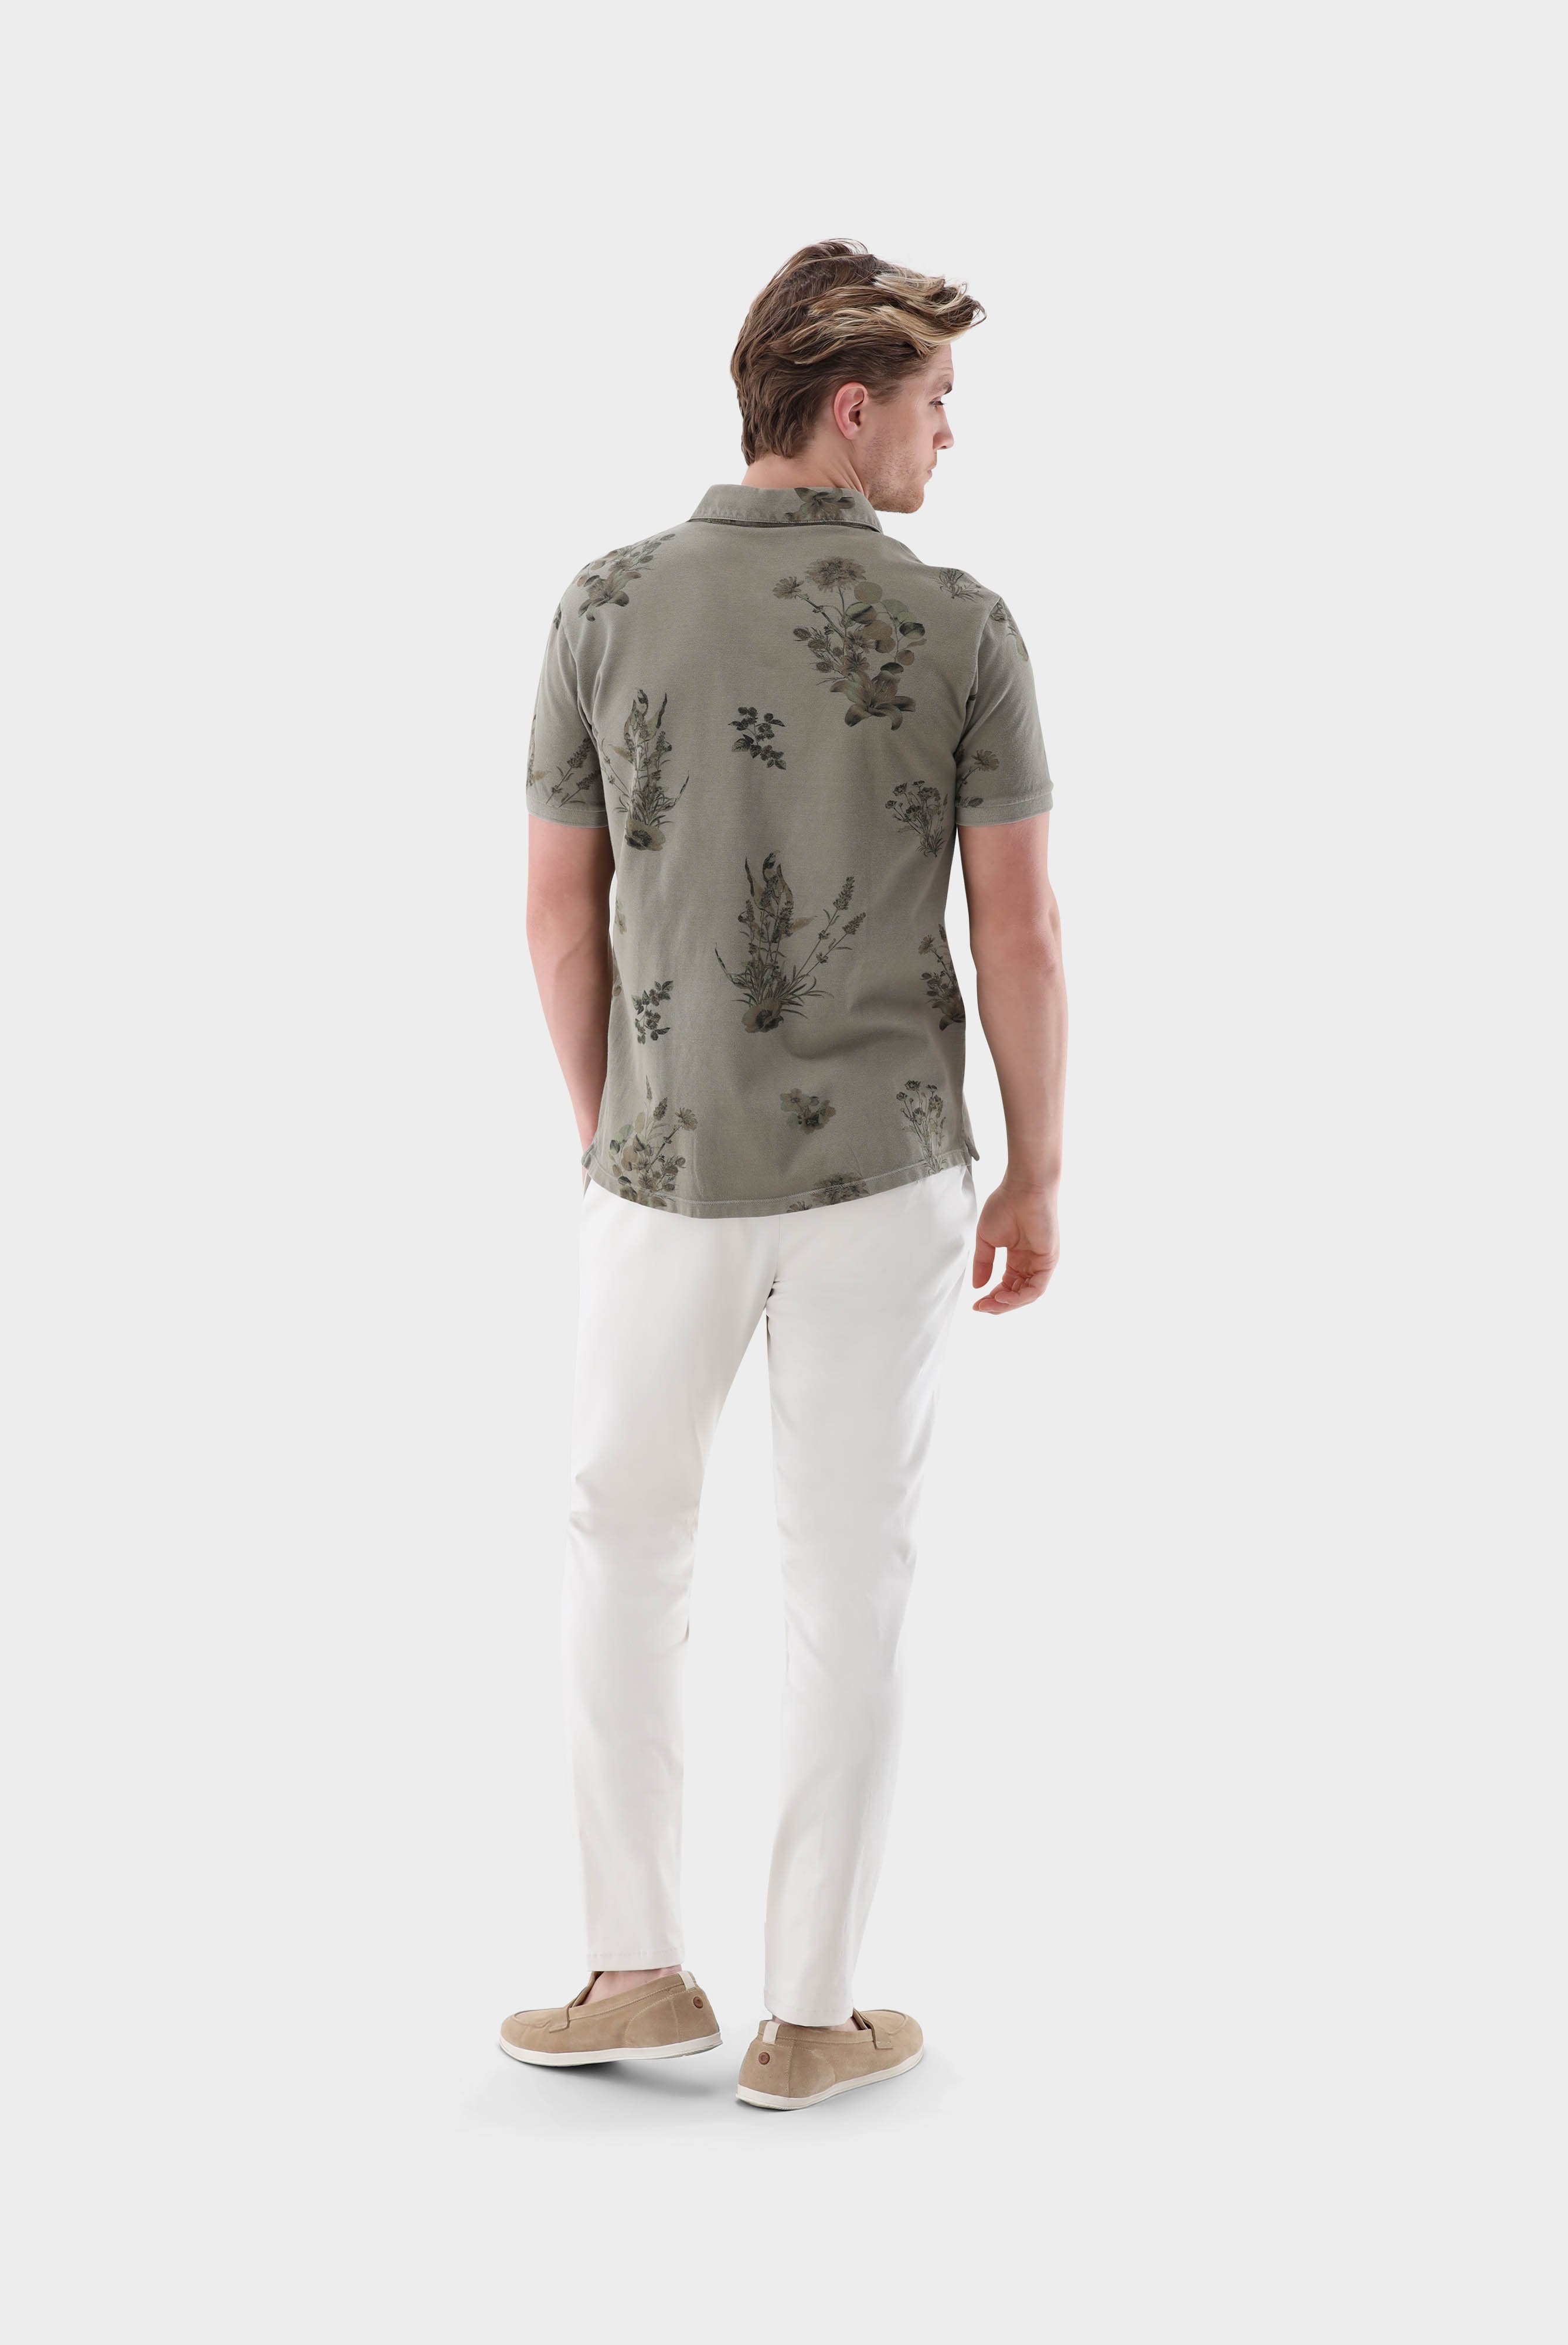 Poloshirts+Garment dyed Piquet Polo with Print+20.1650.SY.Z20047.970.S